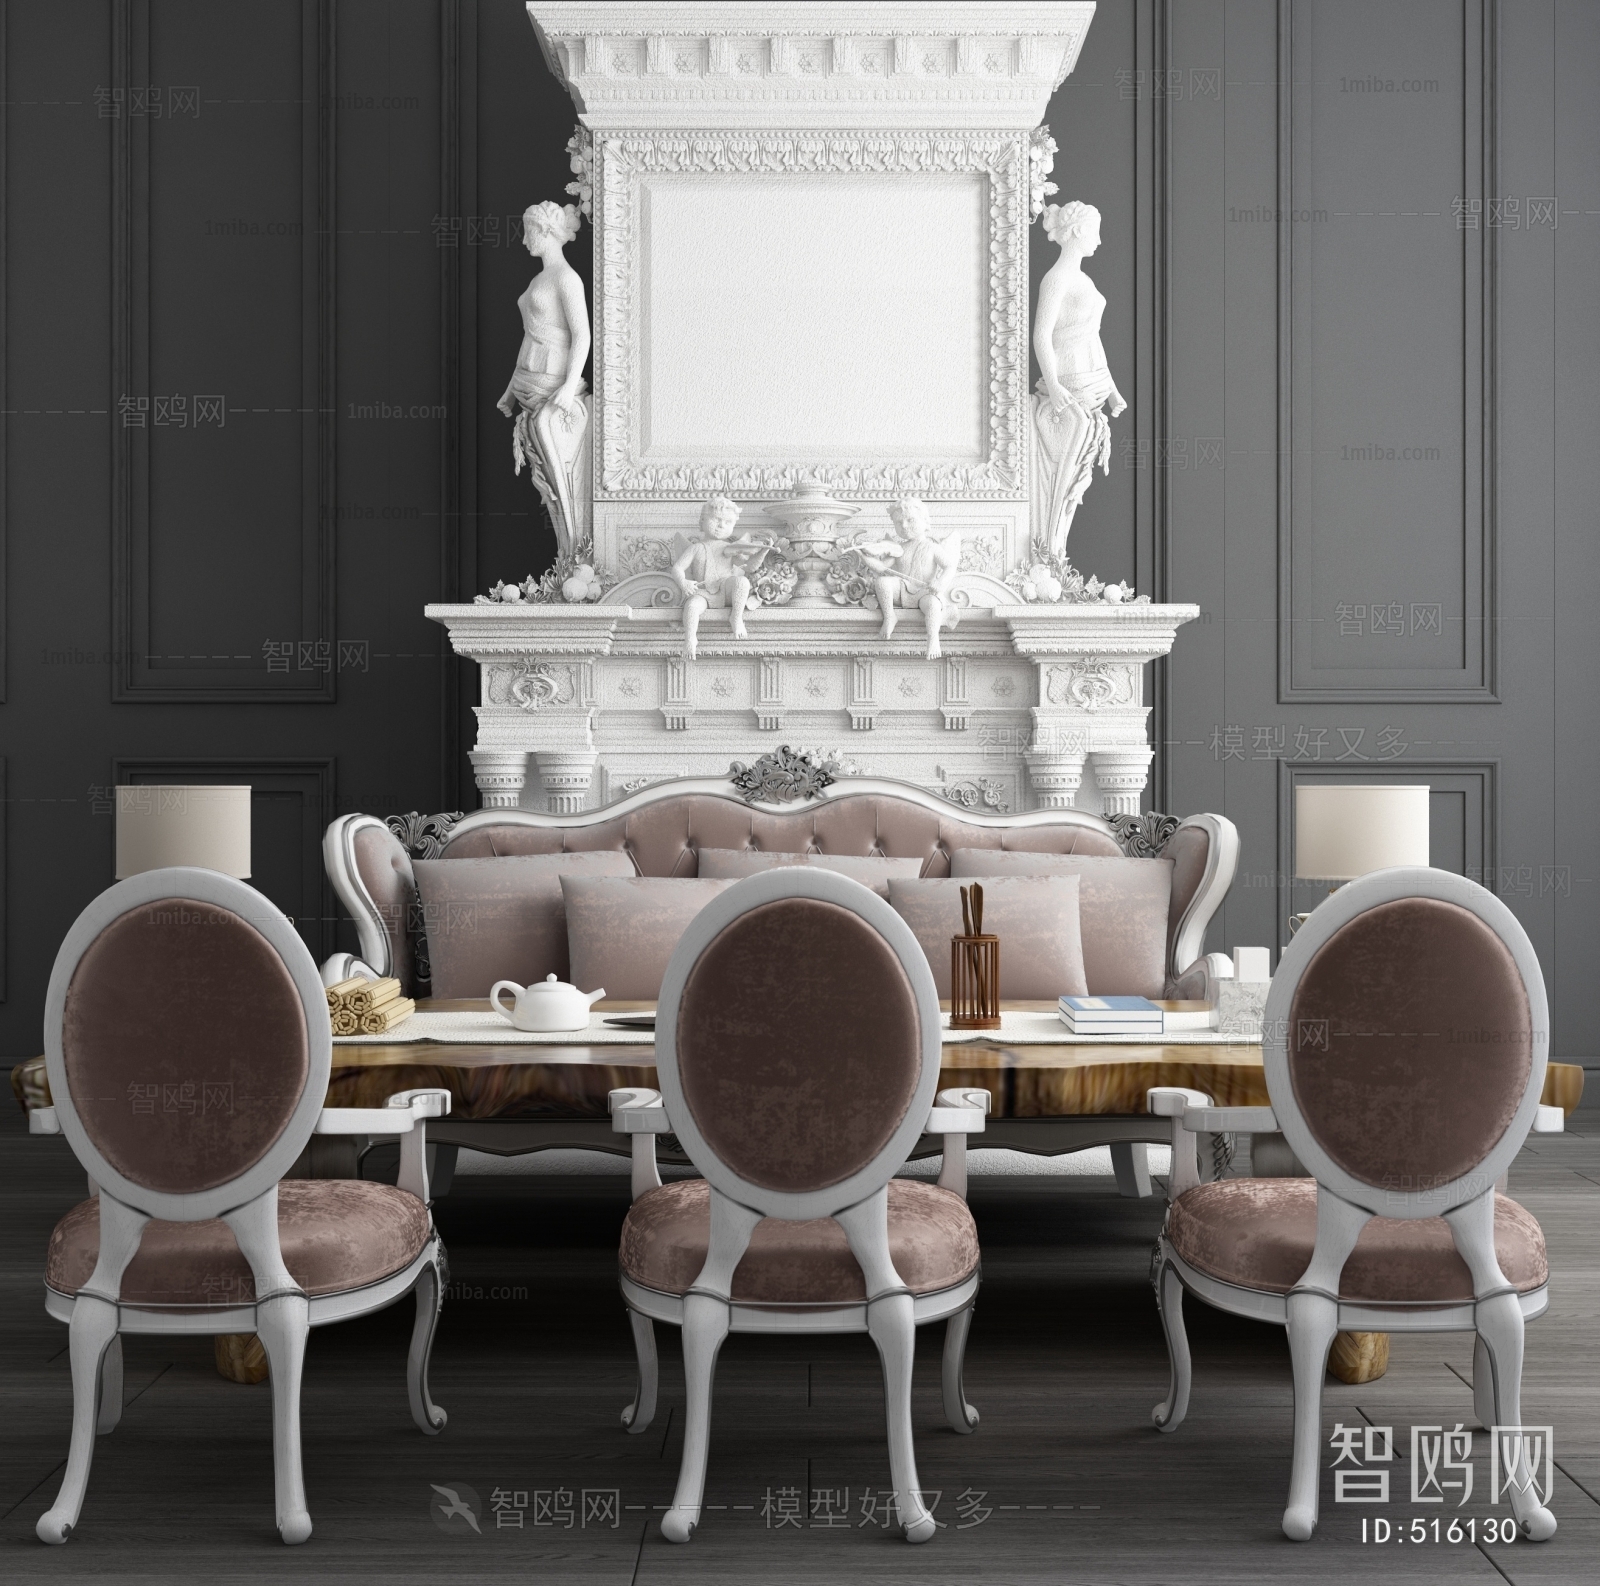 European Style Tea Tables And Chairs